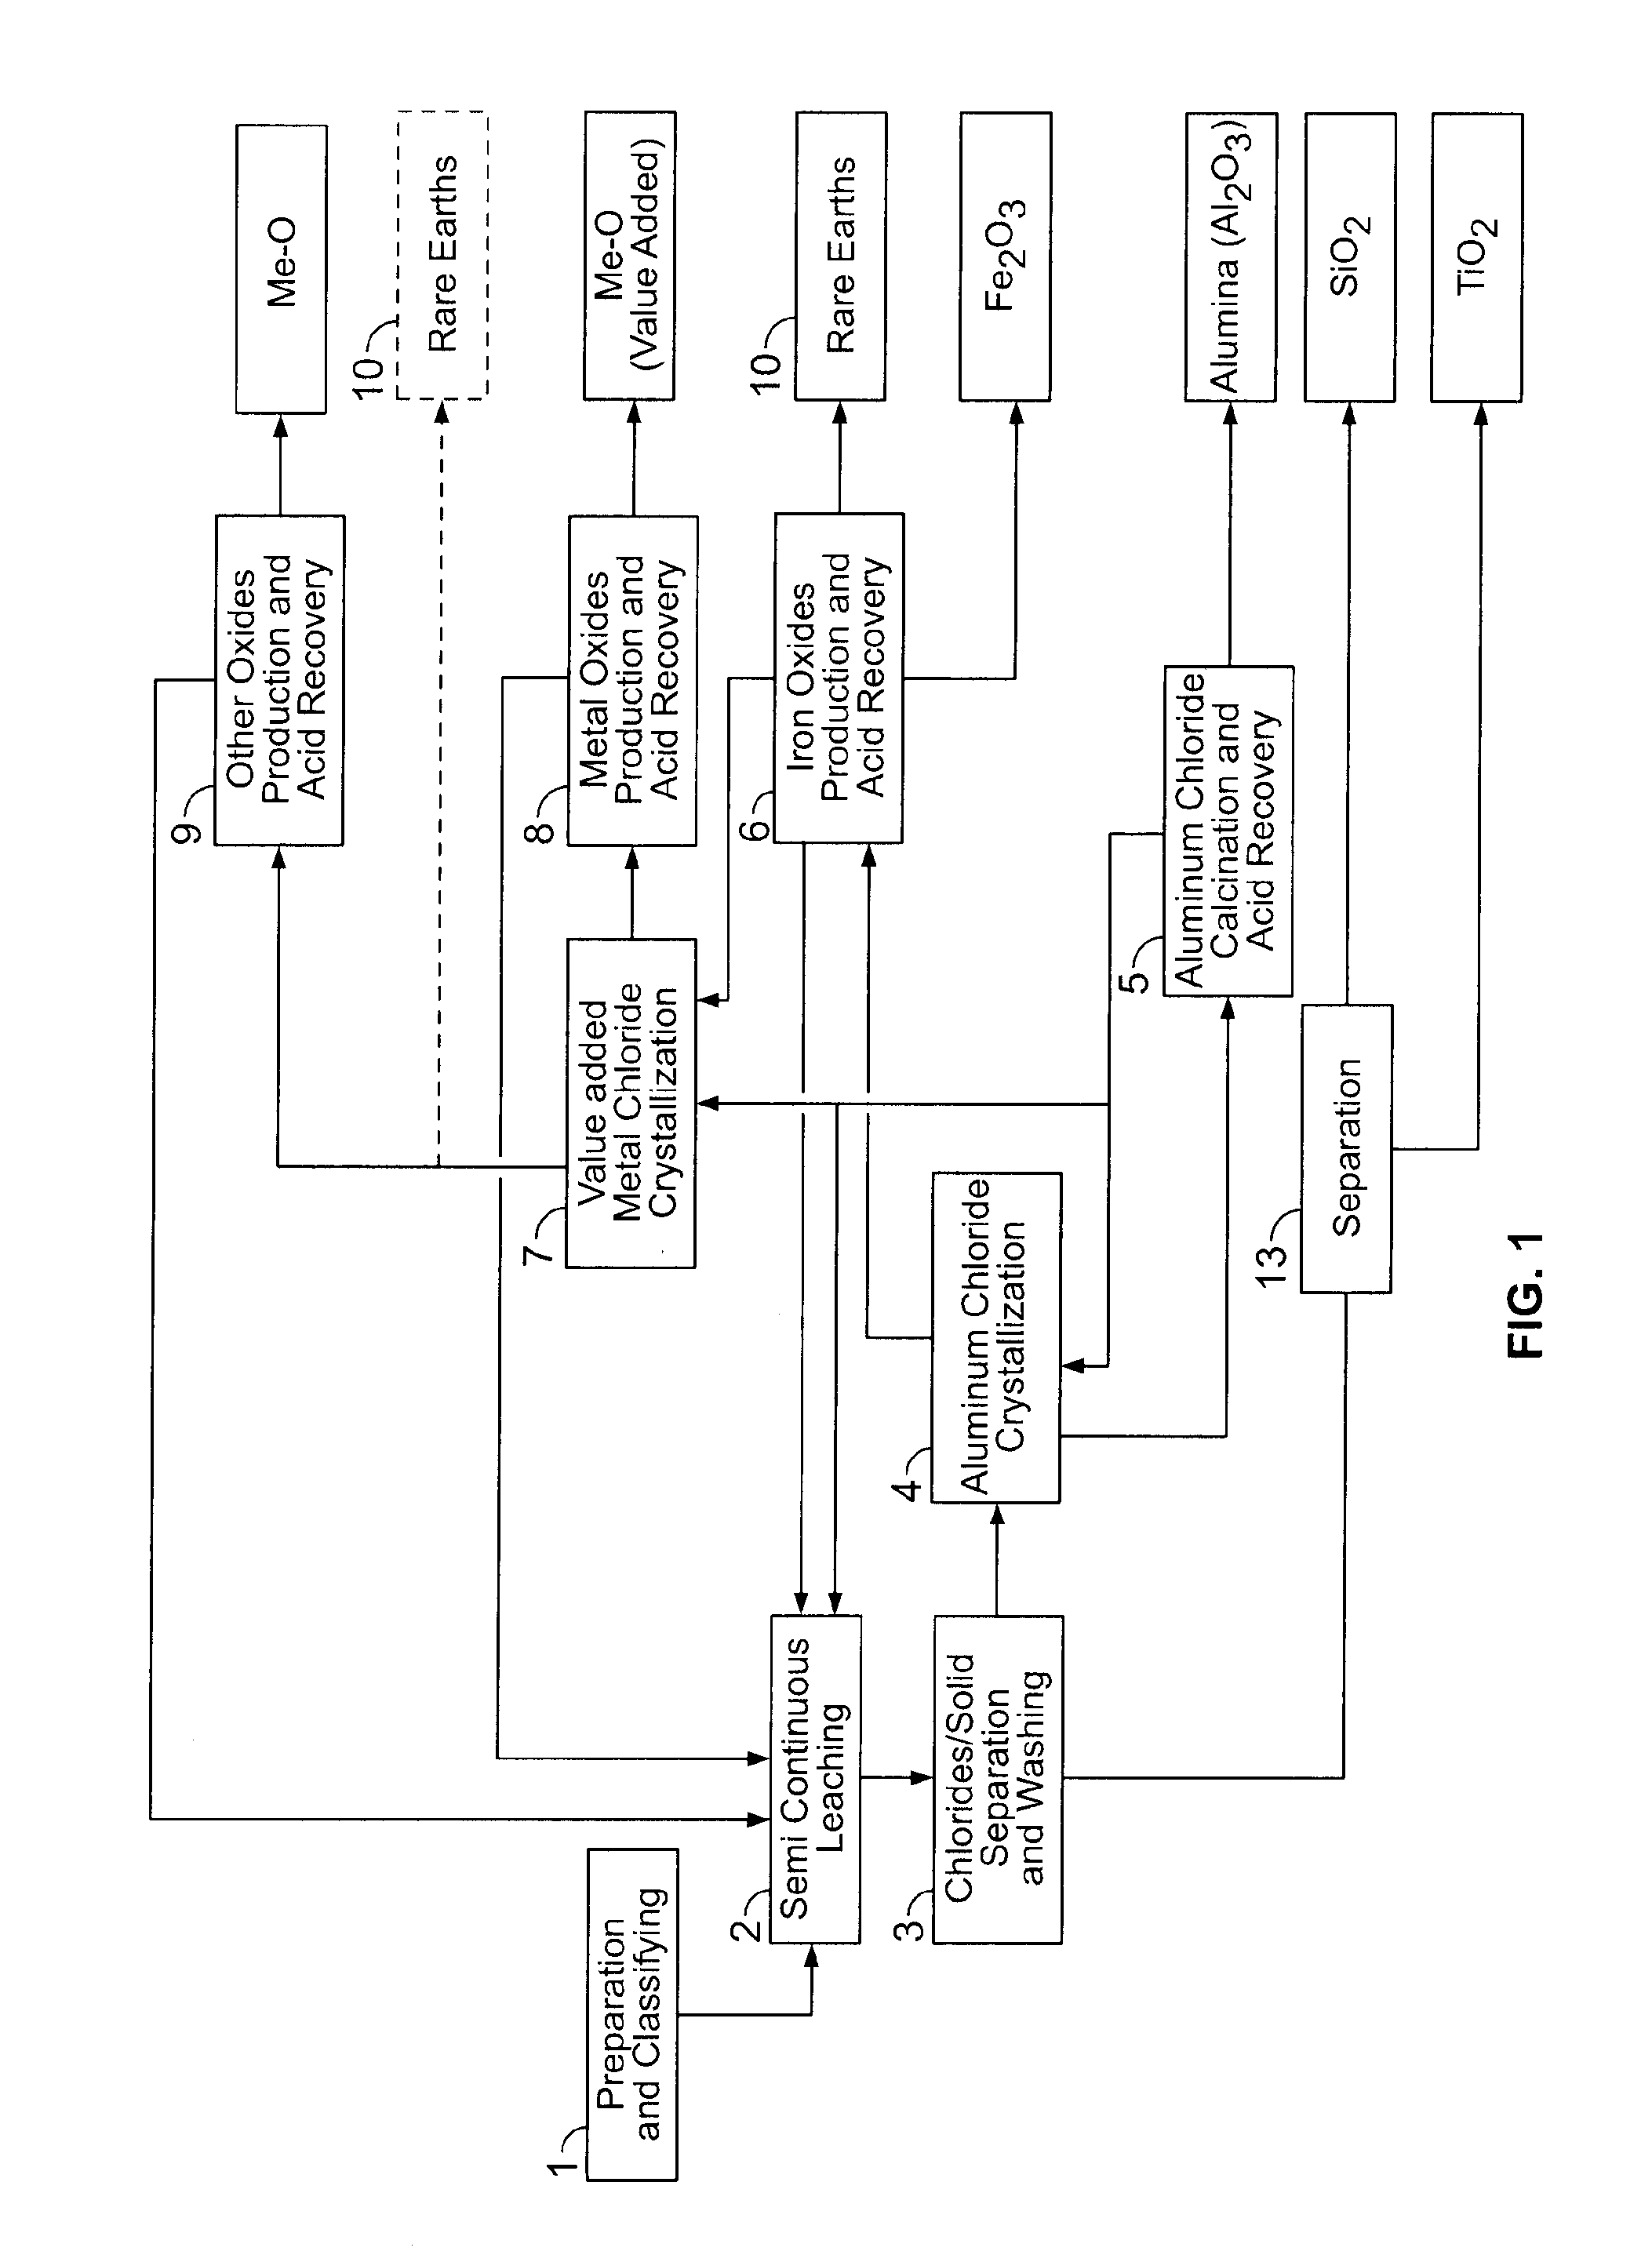 Processes for preparing titanium oxide and various other products